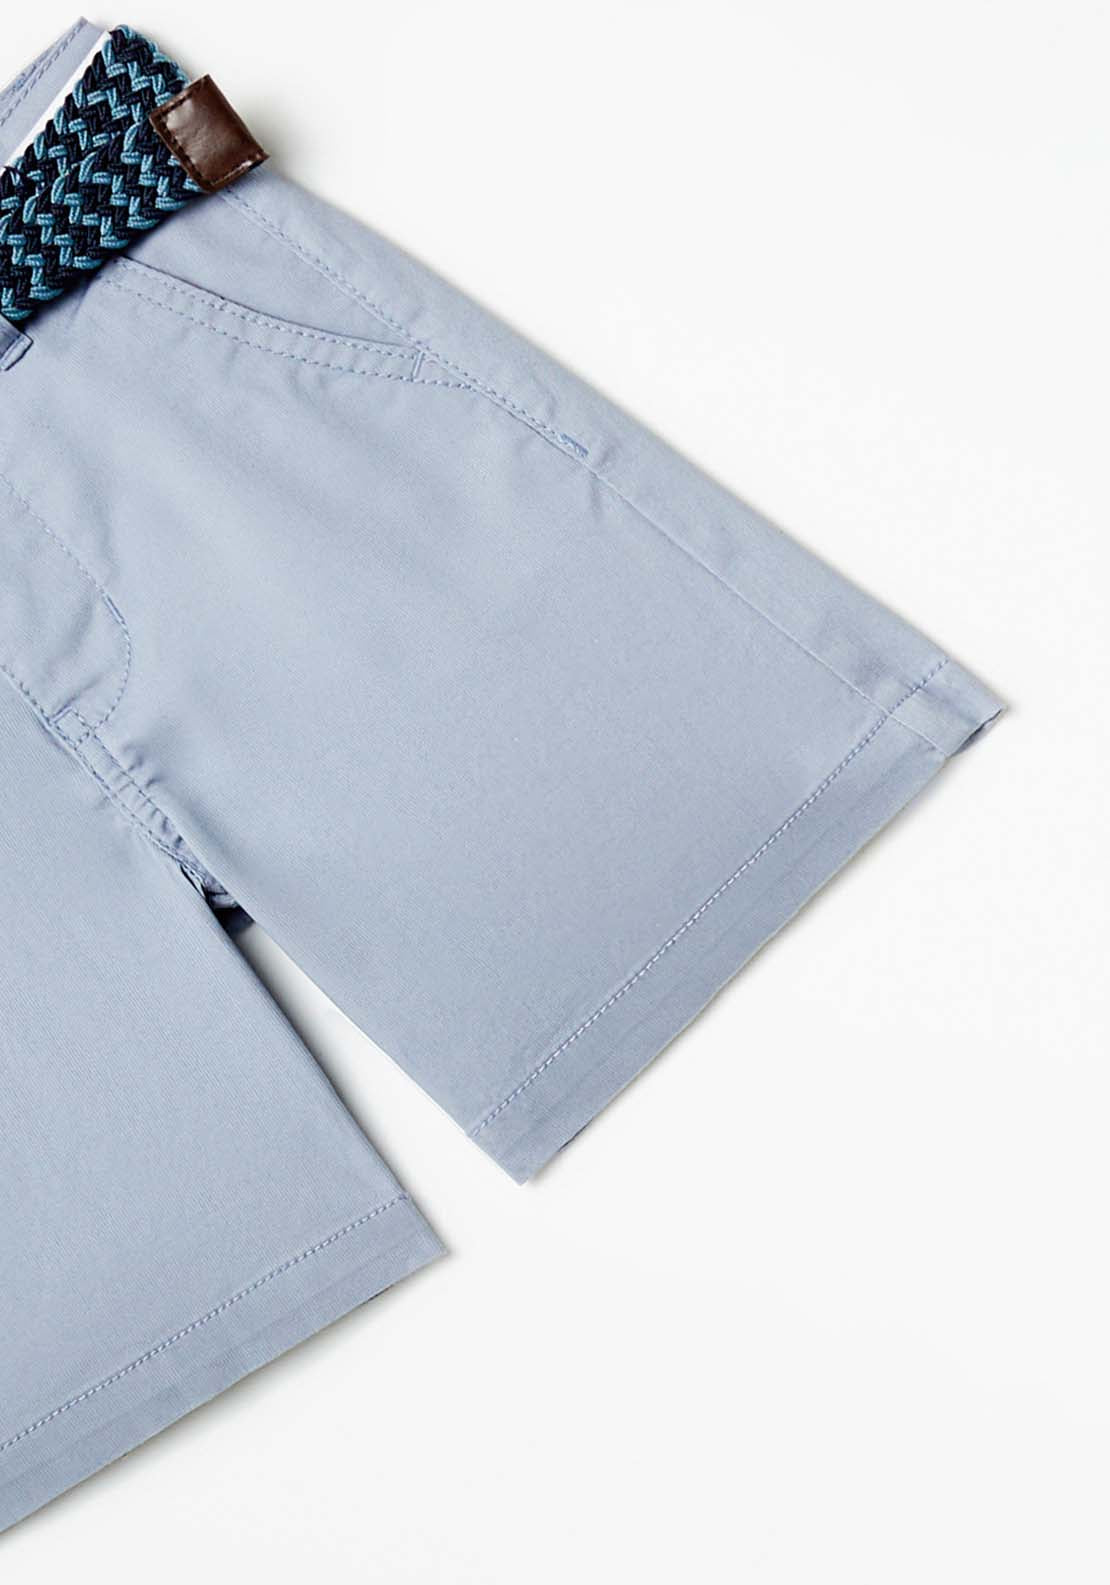 Sfera Formal Shorts With Belt - Blue 6 Shaws Department Stores